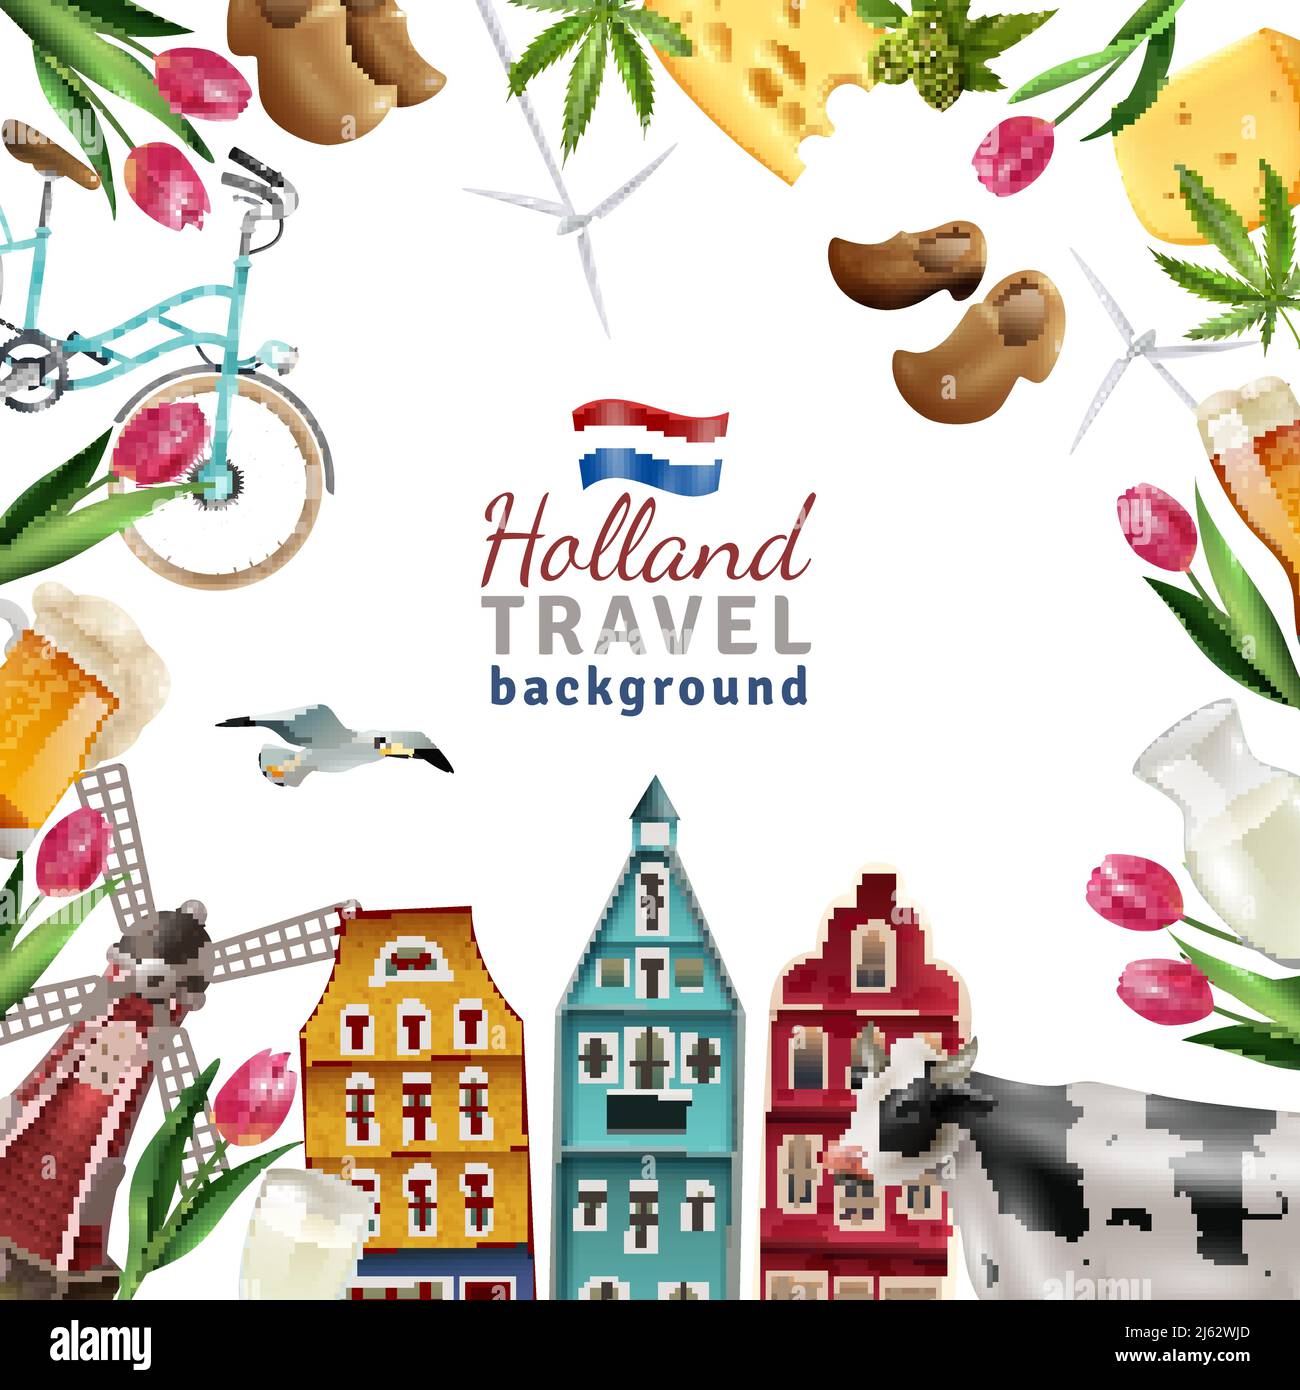 Holland travel cultural and sightseeing  symbols frame background poster with tulips wooden clogs and windmills vector illustration Stock Vector